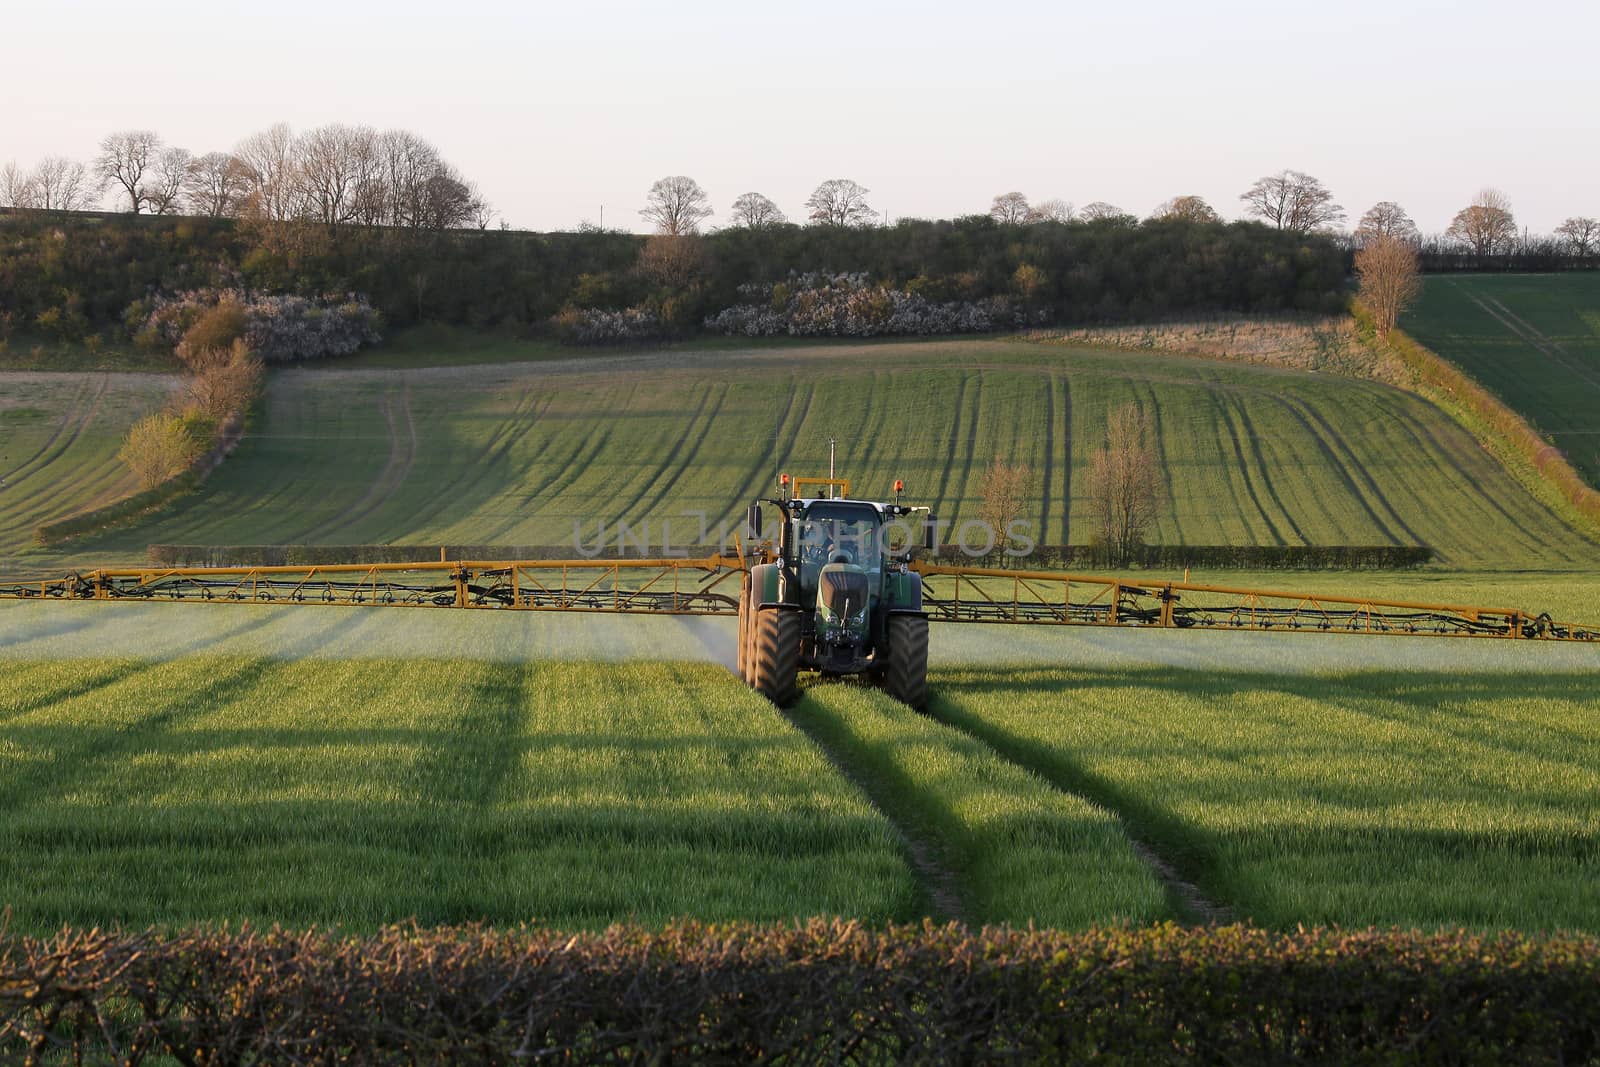 Agriculture - A farmer spraying fertilizer on his crops - North Yorkshire - England.